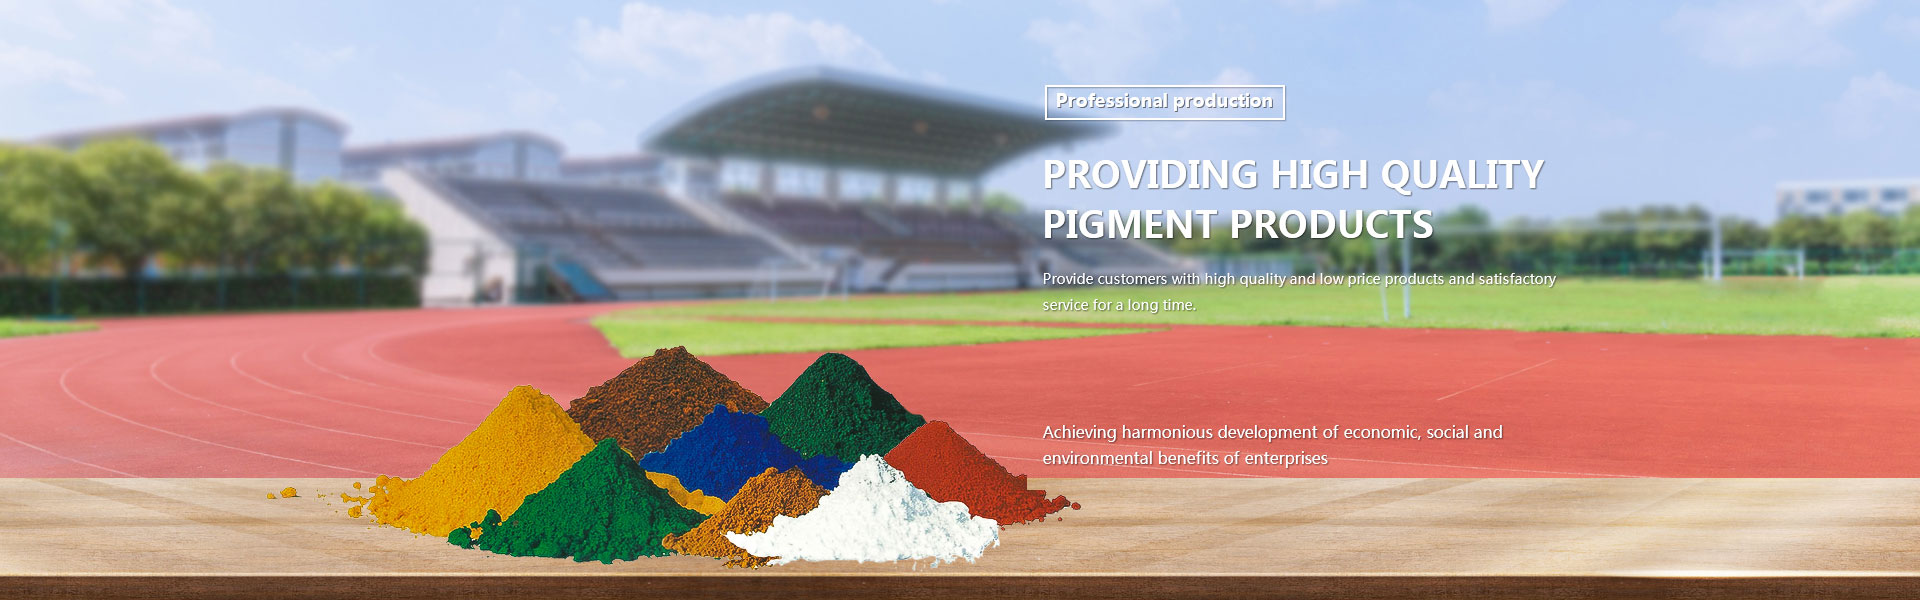 Provide customers with high quality, continuous and stable pigment products with consistent color